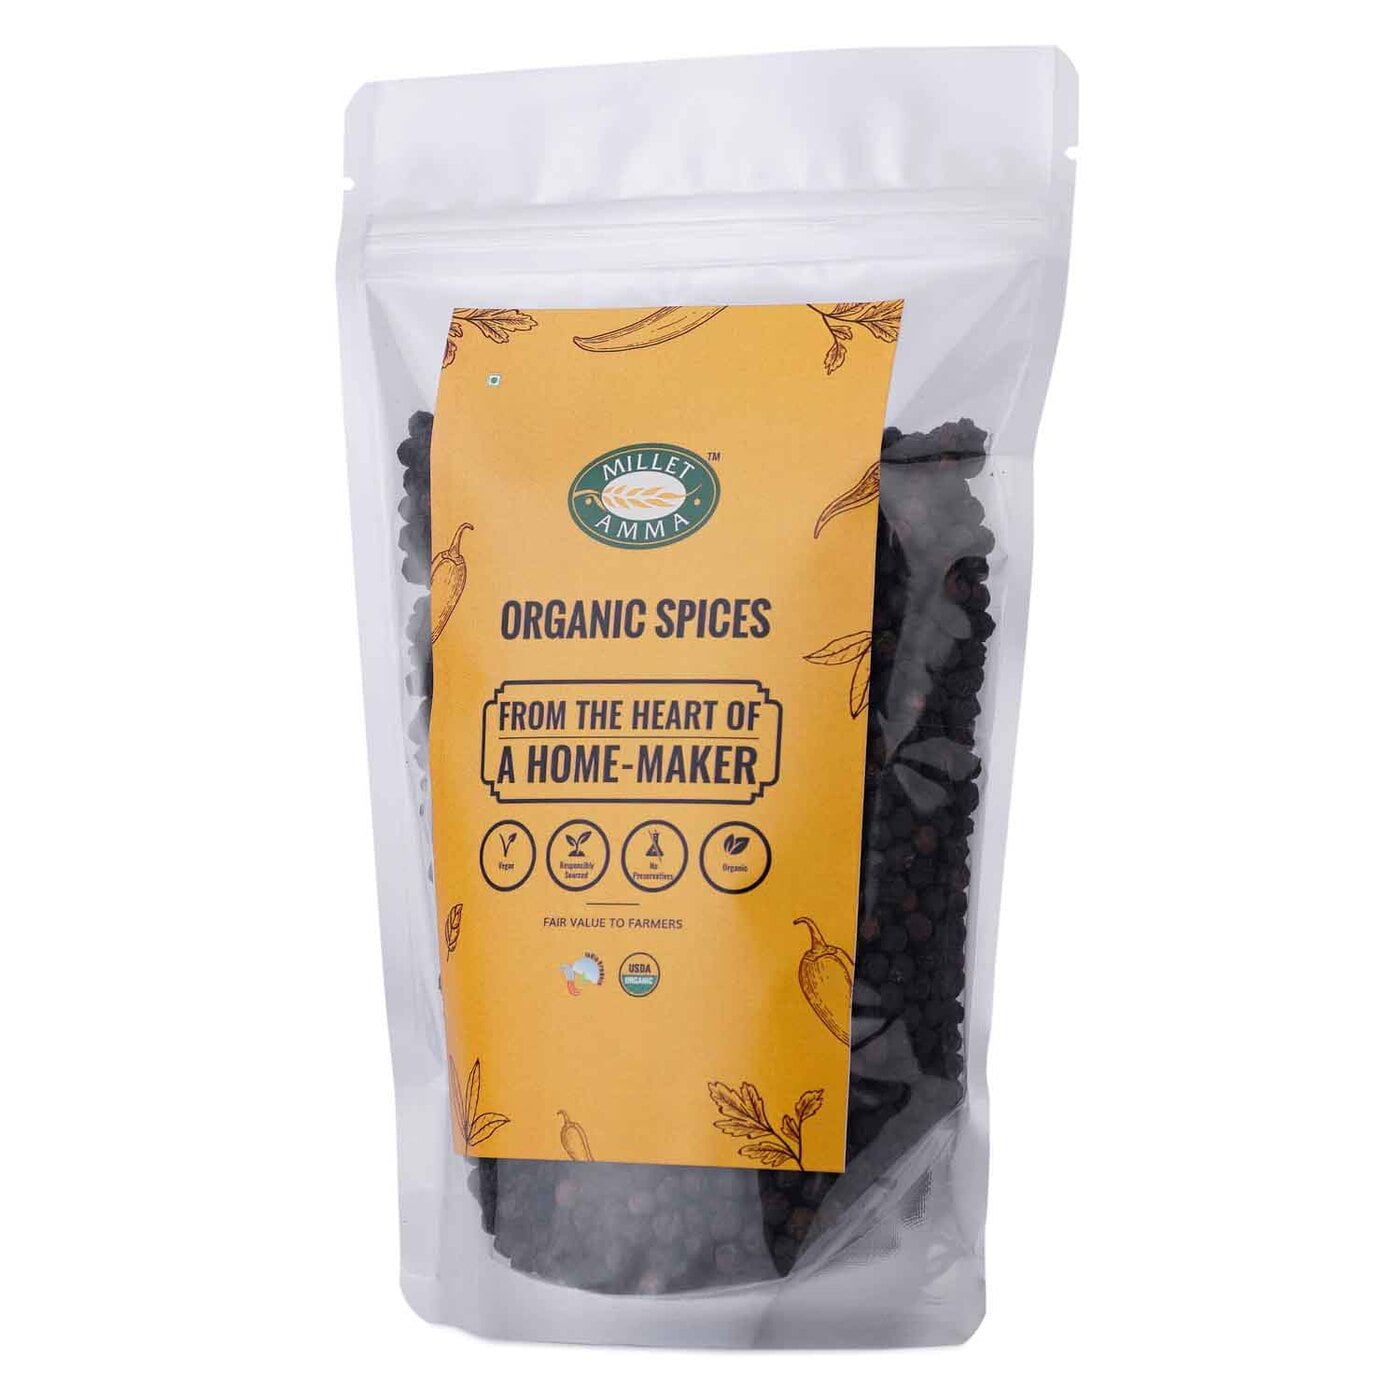 Milletamma’s Black Pepper Corns have Vitamin C, Vitamin A, Flavonoids, Carotenes and Antioxidants that help to protect the body from cancer and other diseases.  It works as an antibiotic that helps to cure cold and cough  It increases metabolism that helps to lose weight.